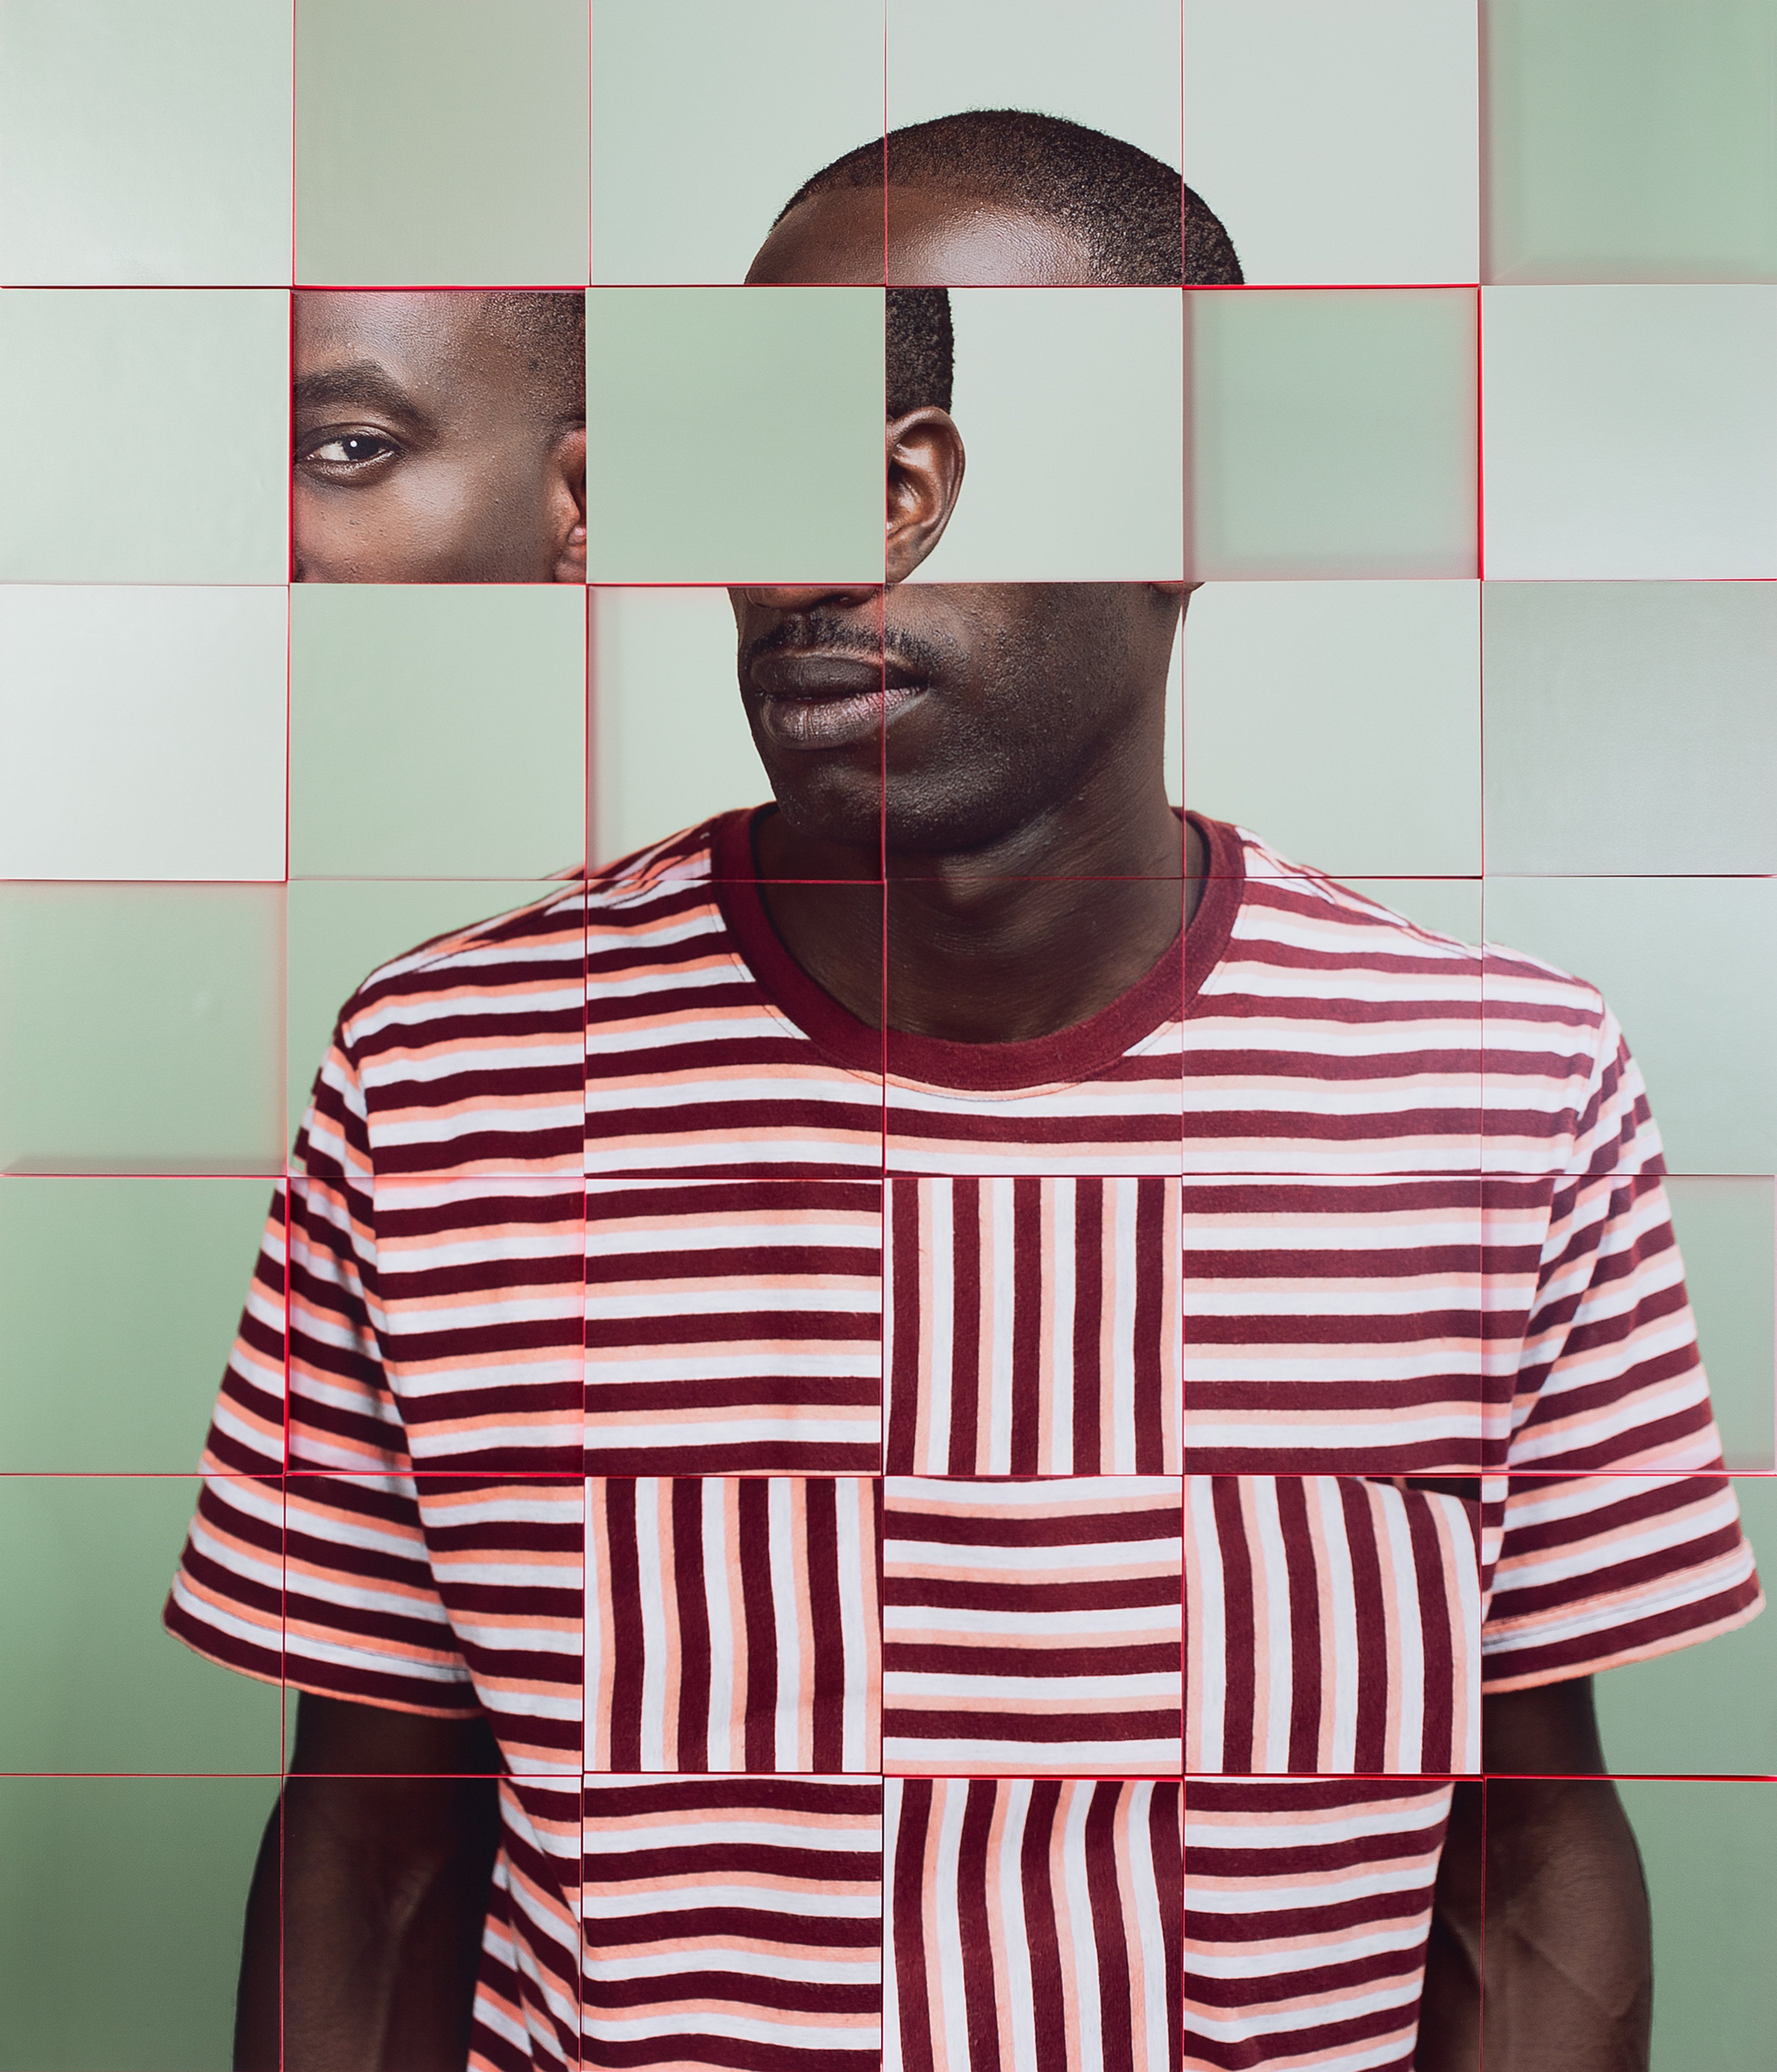 Portrait of a black man in bright striped shirt broken up alike to a square jigsaw, looking at the camera.